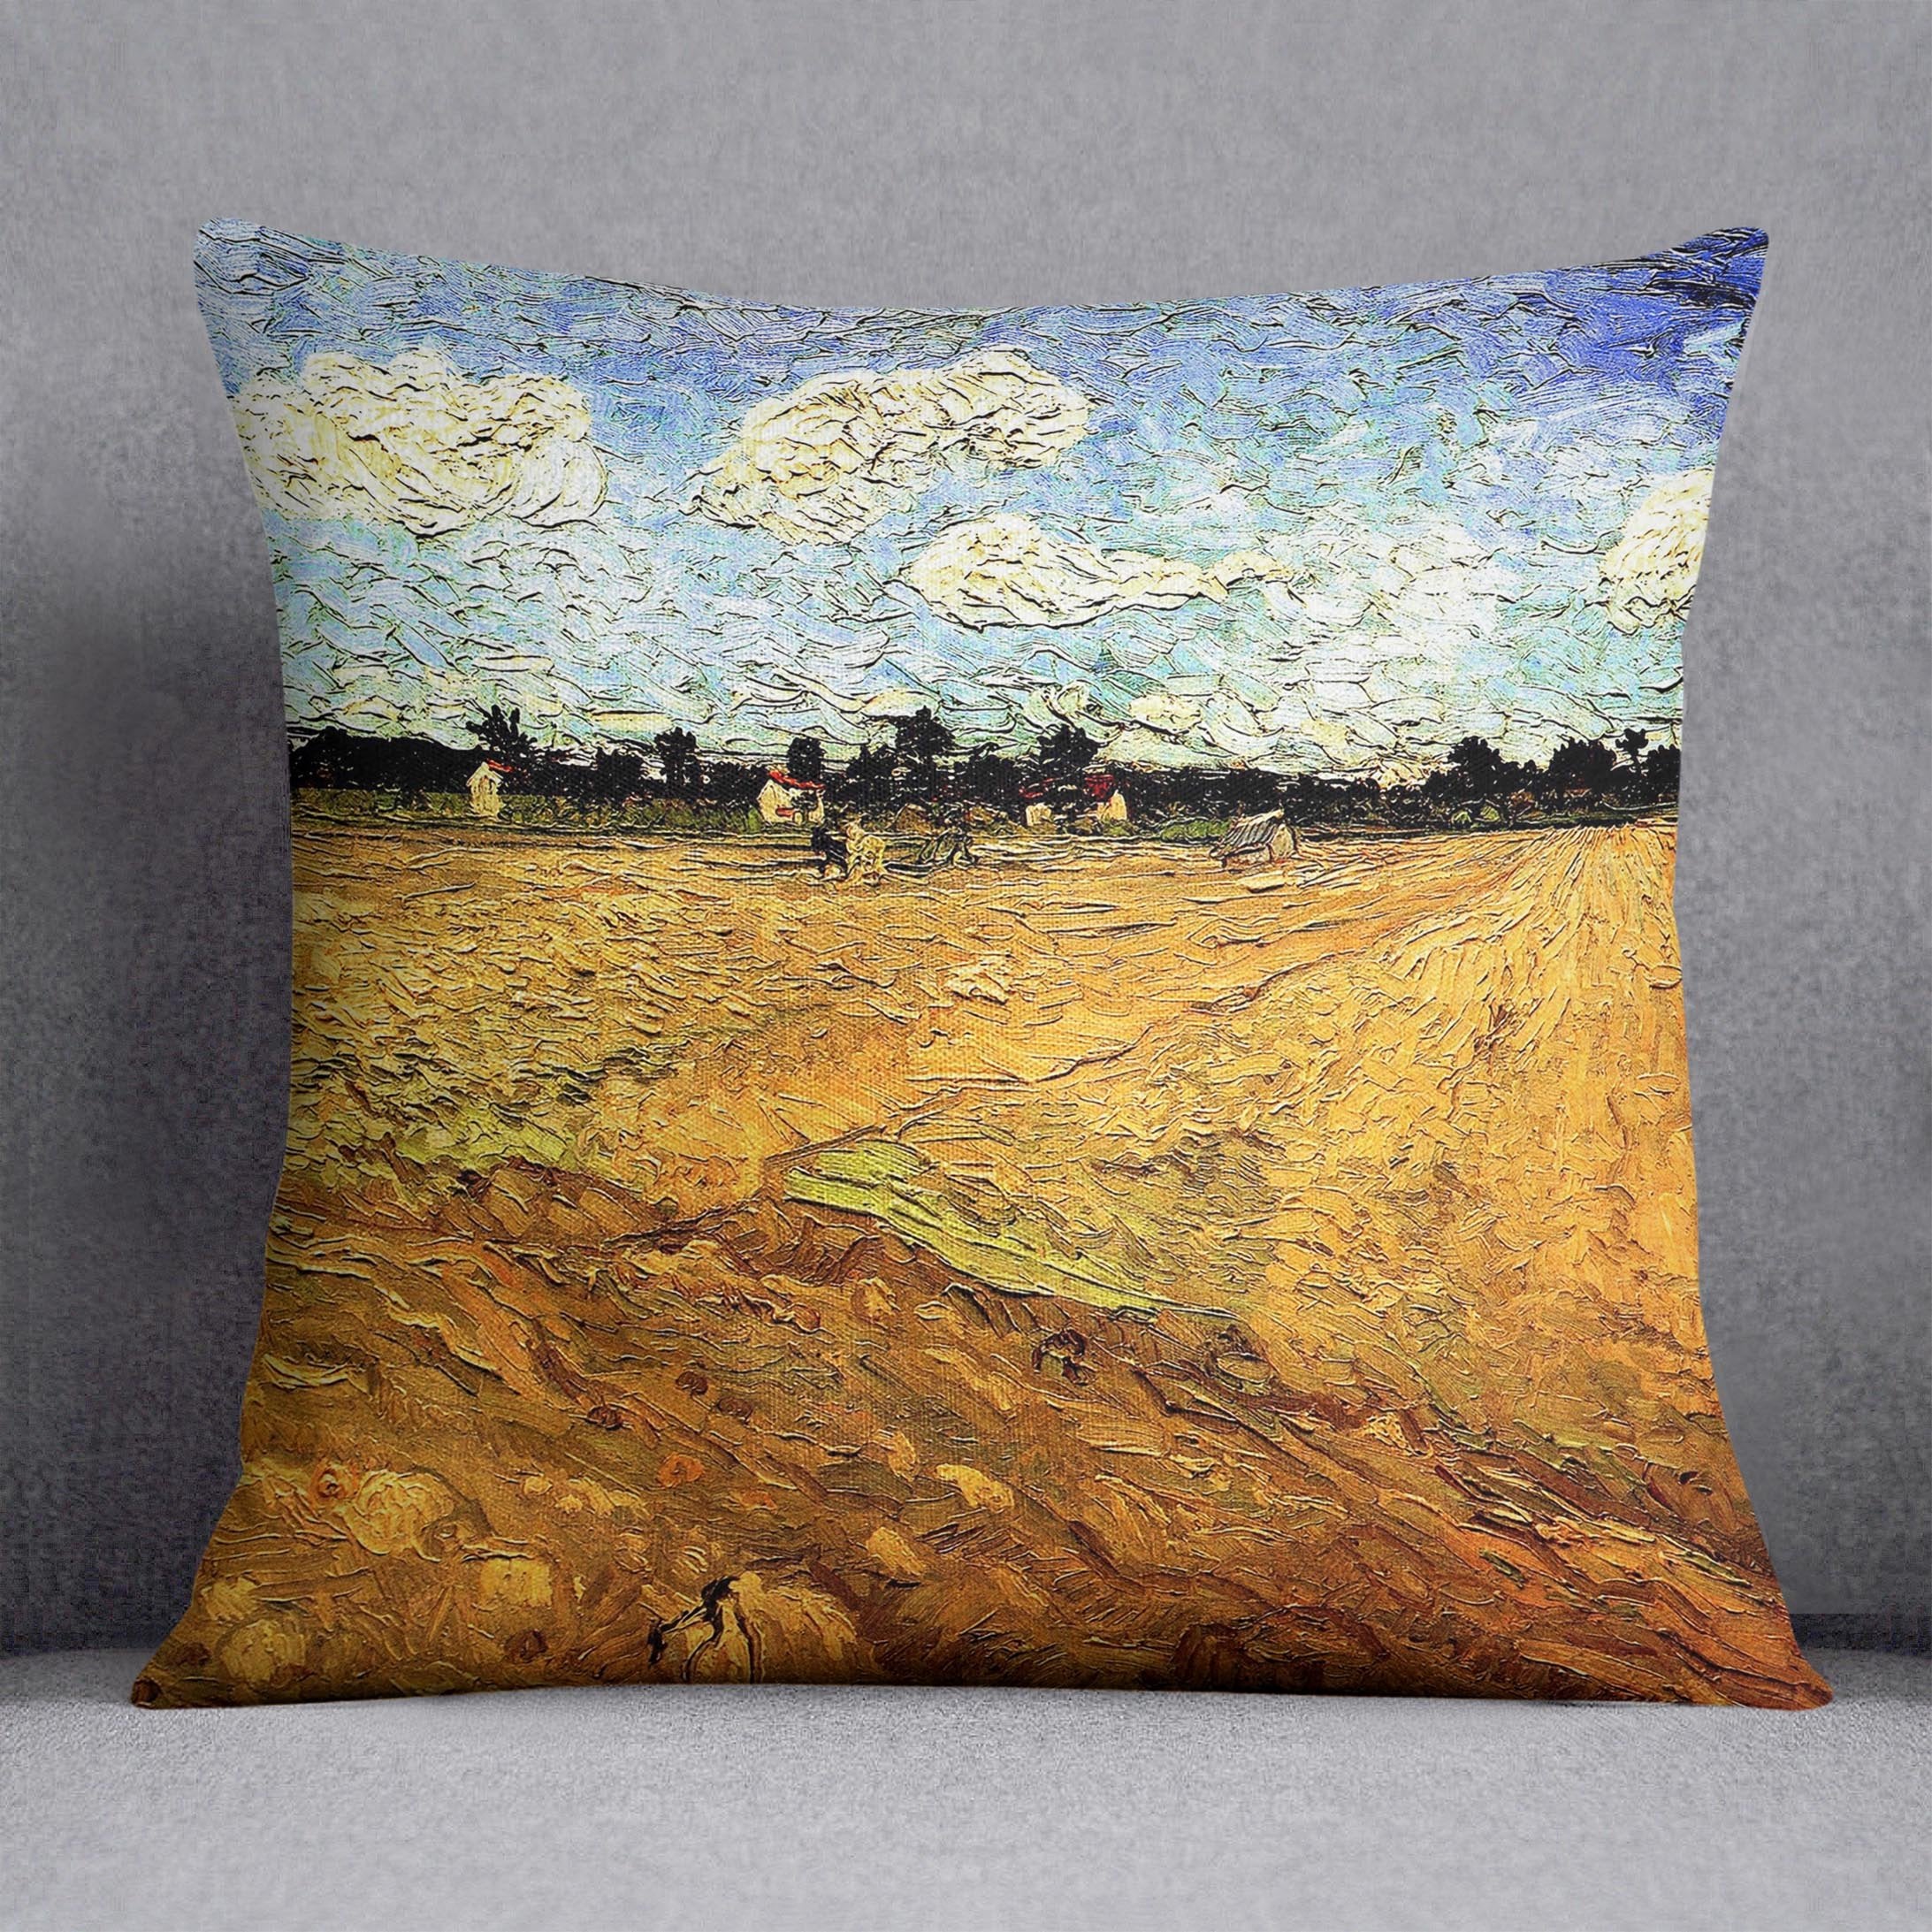 Ploughed Field by Van Gogh Throw Pillow